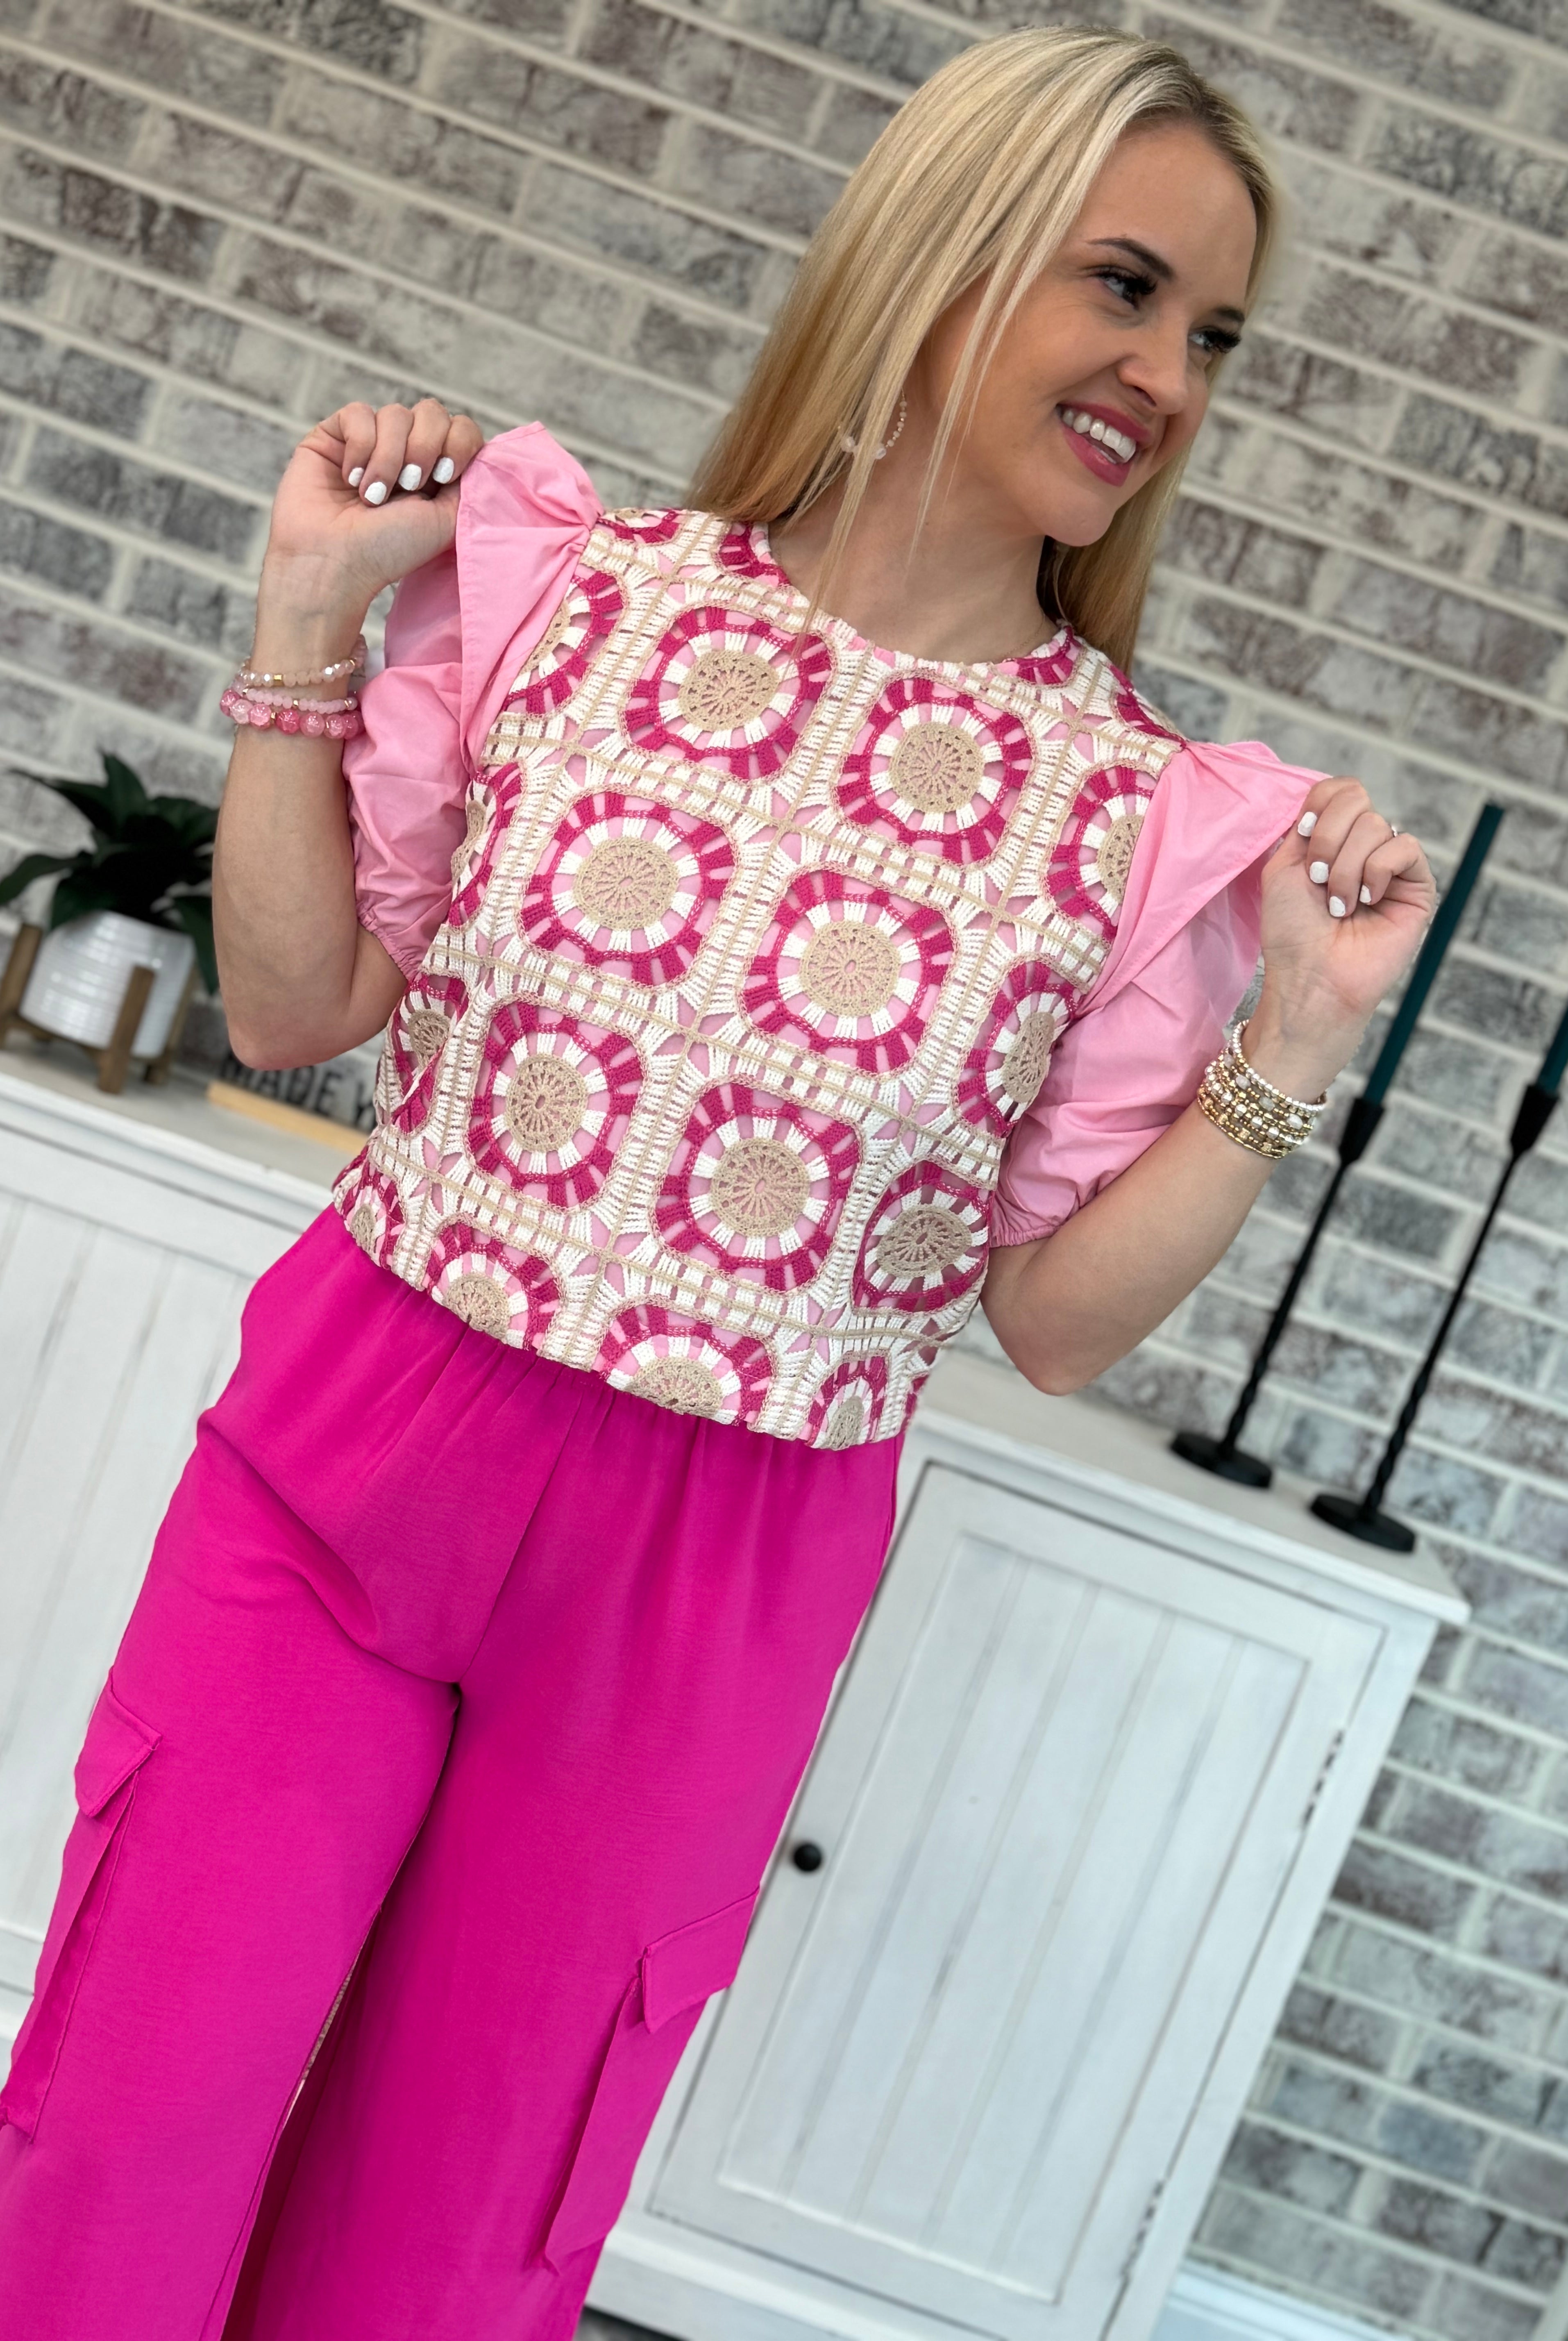 Hello Cutie Crochet Top-100 Short Sleeve Tops-The Lovely Closet-The Lovely Closet, Women's Fashion Boutique in Alexandria, KY